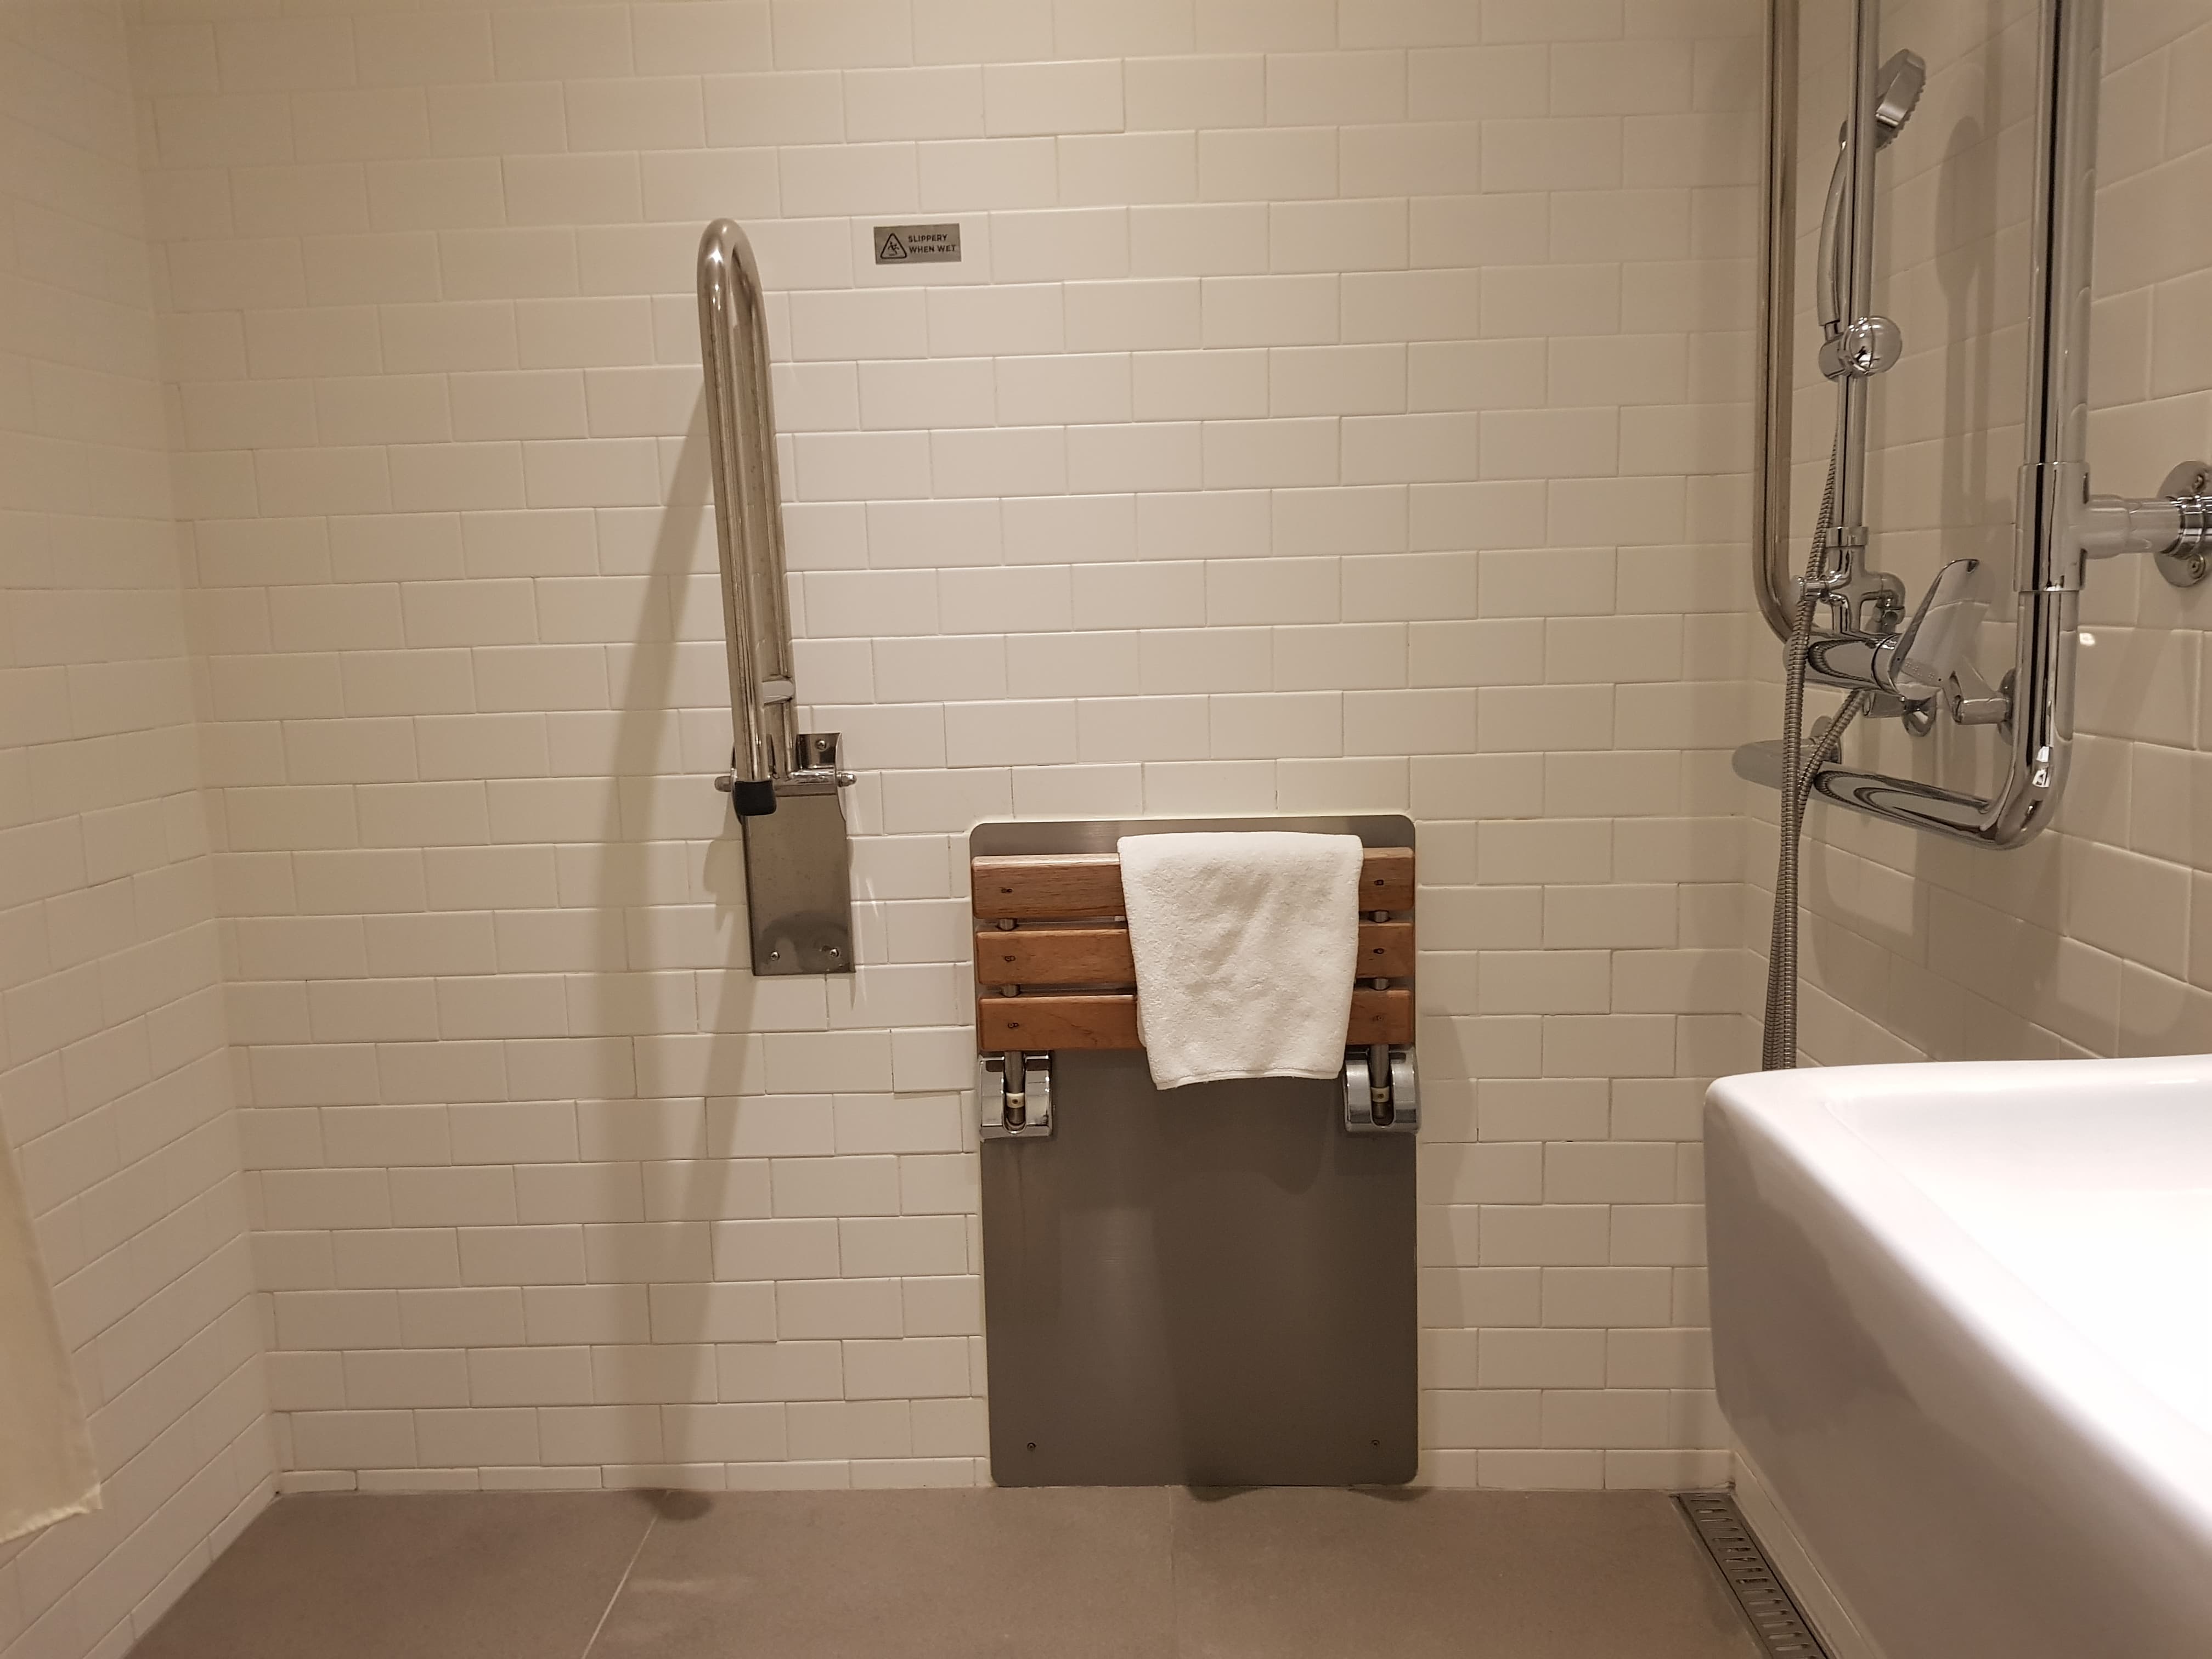 Accessible guestroom bathroom0 : Wall-mounted shower chair with a towel hanging over